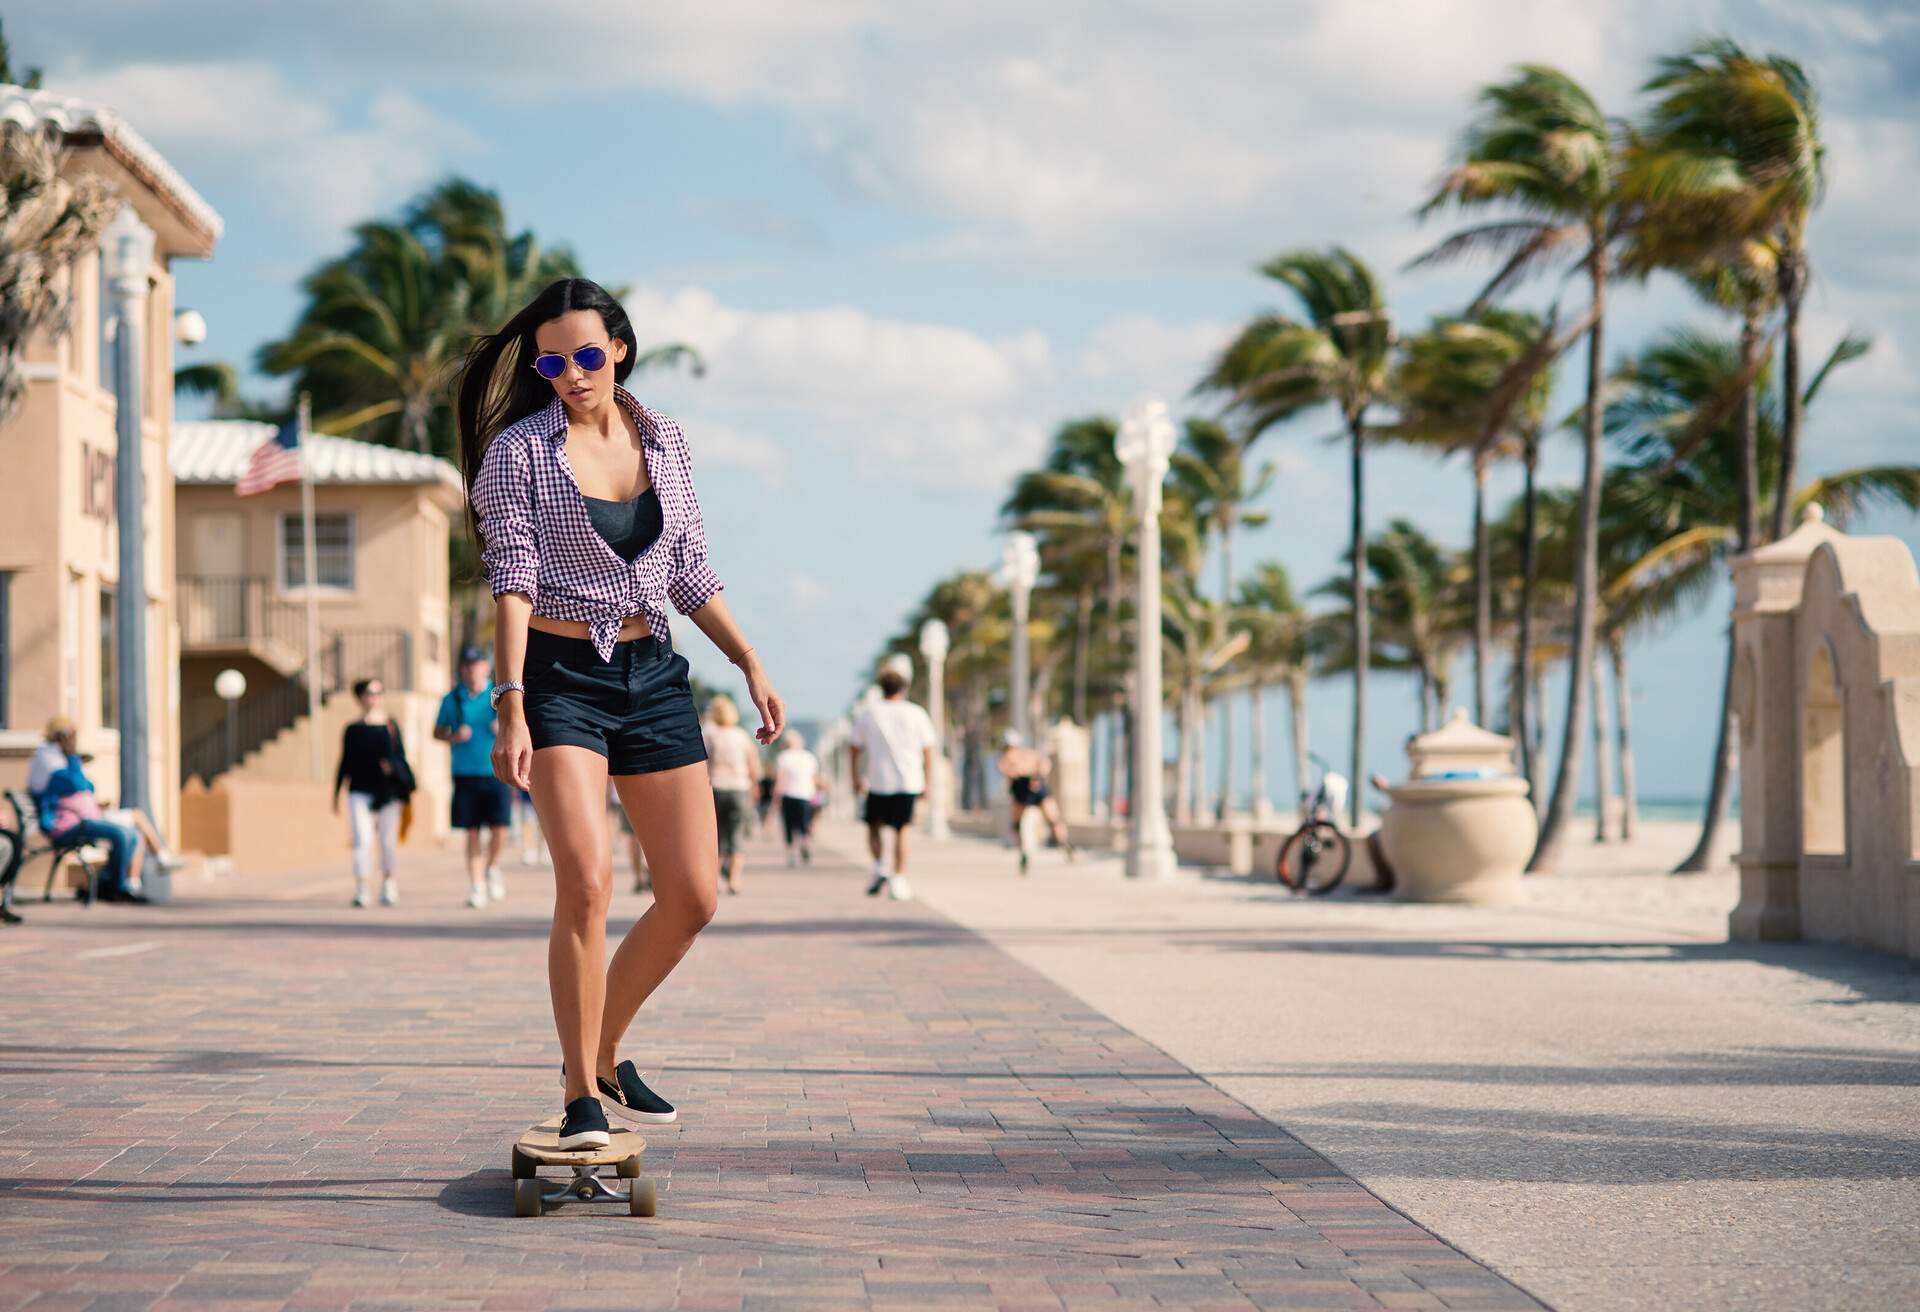 Sporty young woman riding long board on Hollywood beach in Miami, Florida